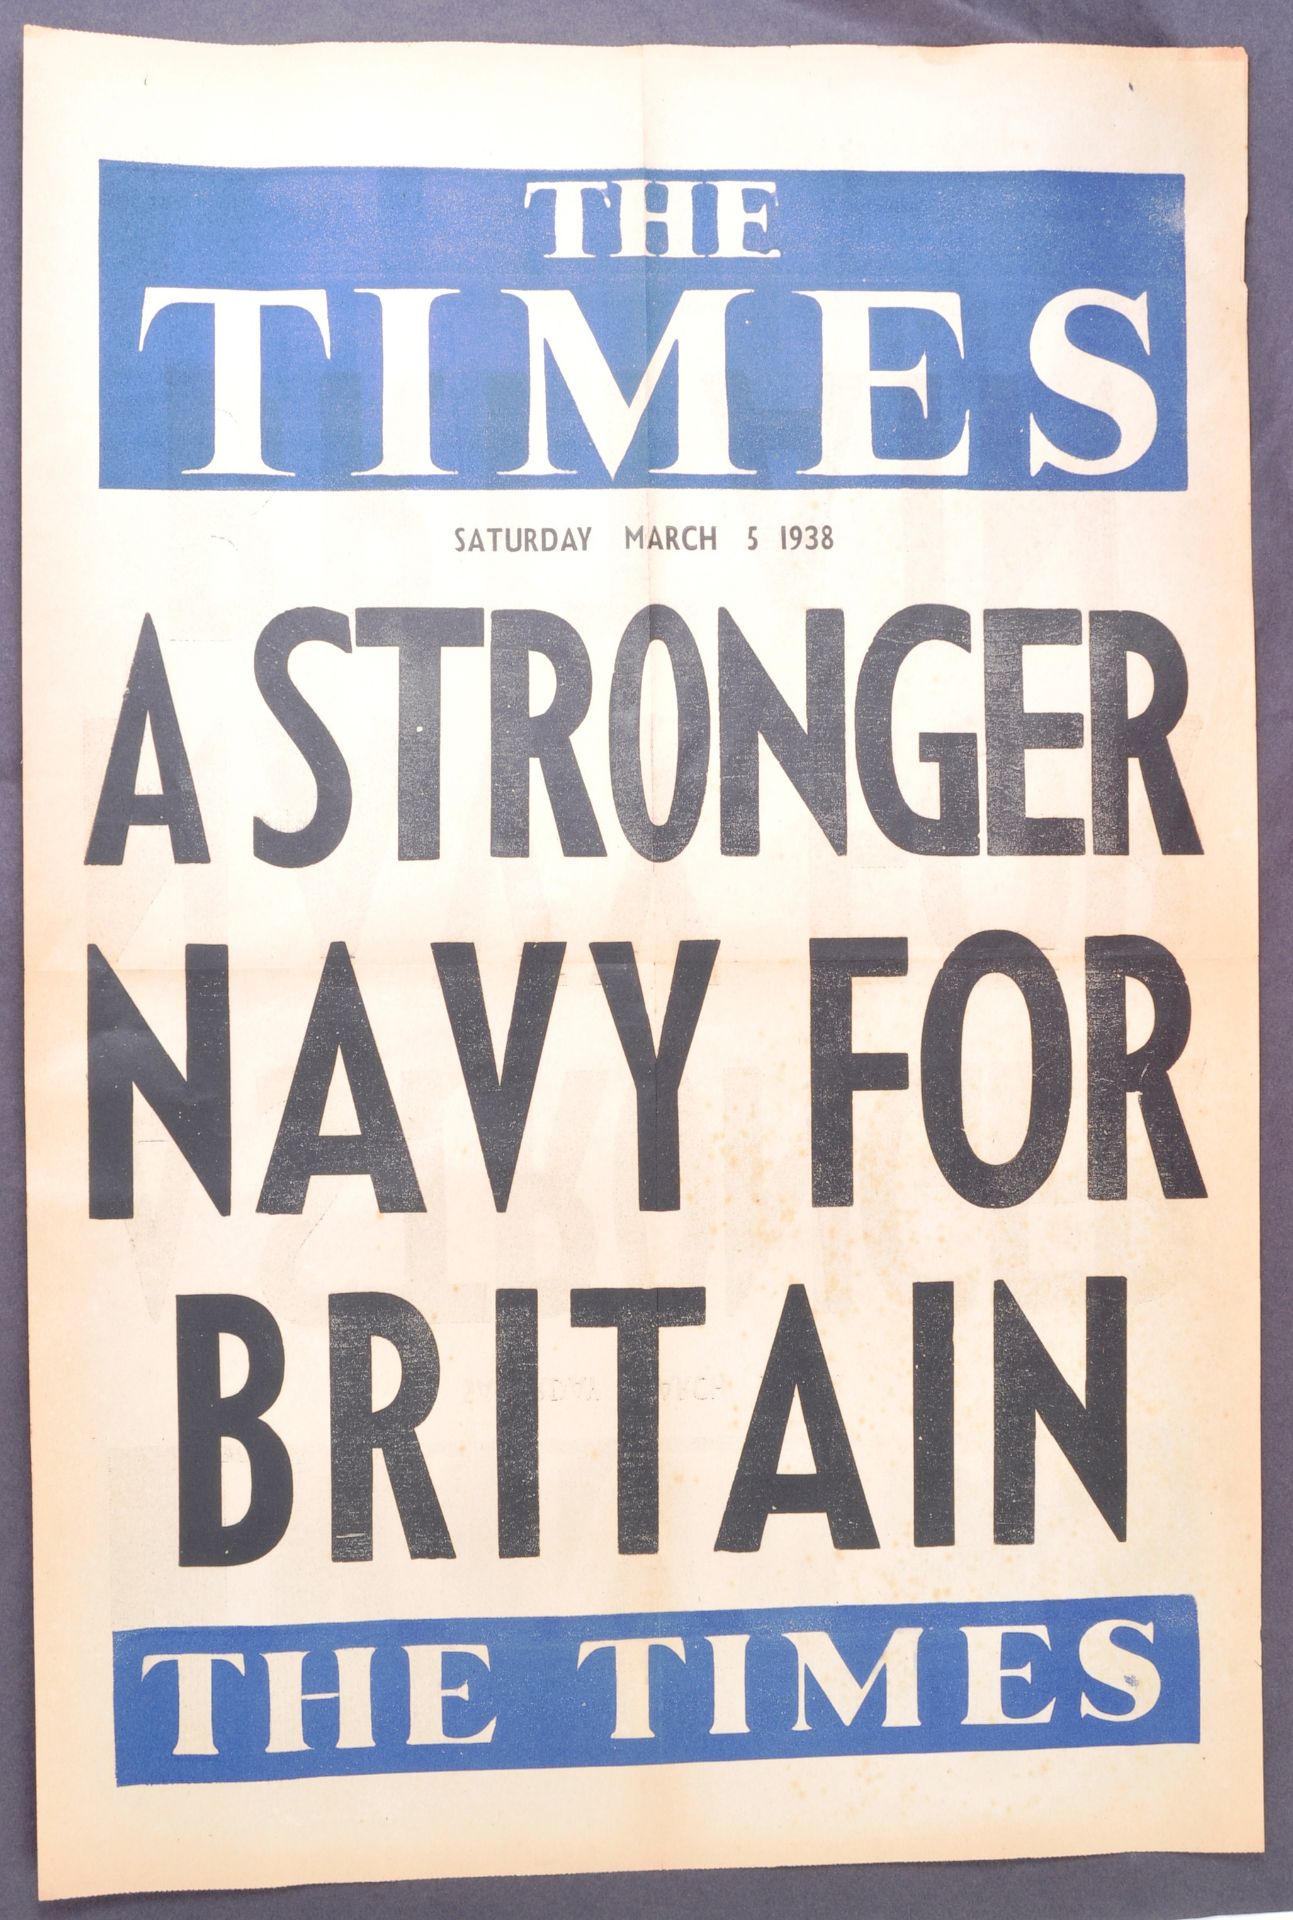 RARE ORIGINAL 1938 THE TIMES NEWSPAPER ADVERTISING POSTER - NAVY - Image 6 of 10